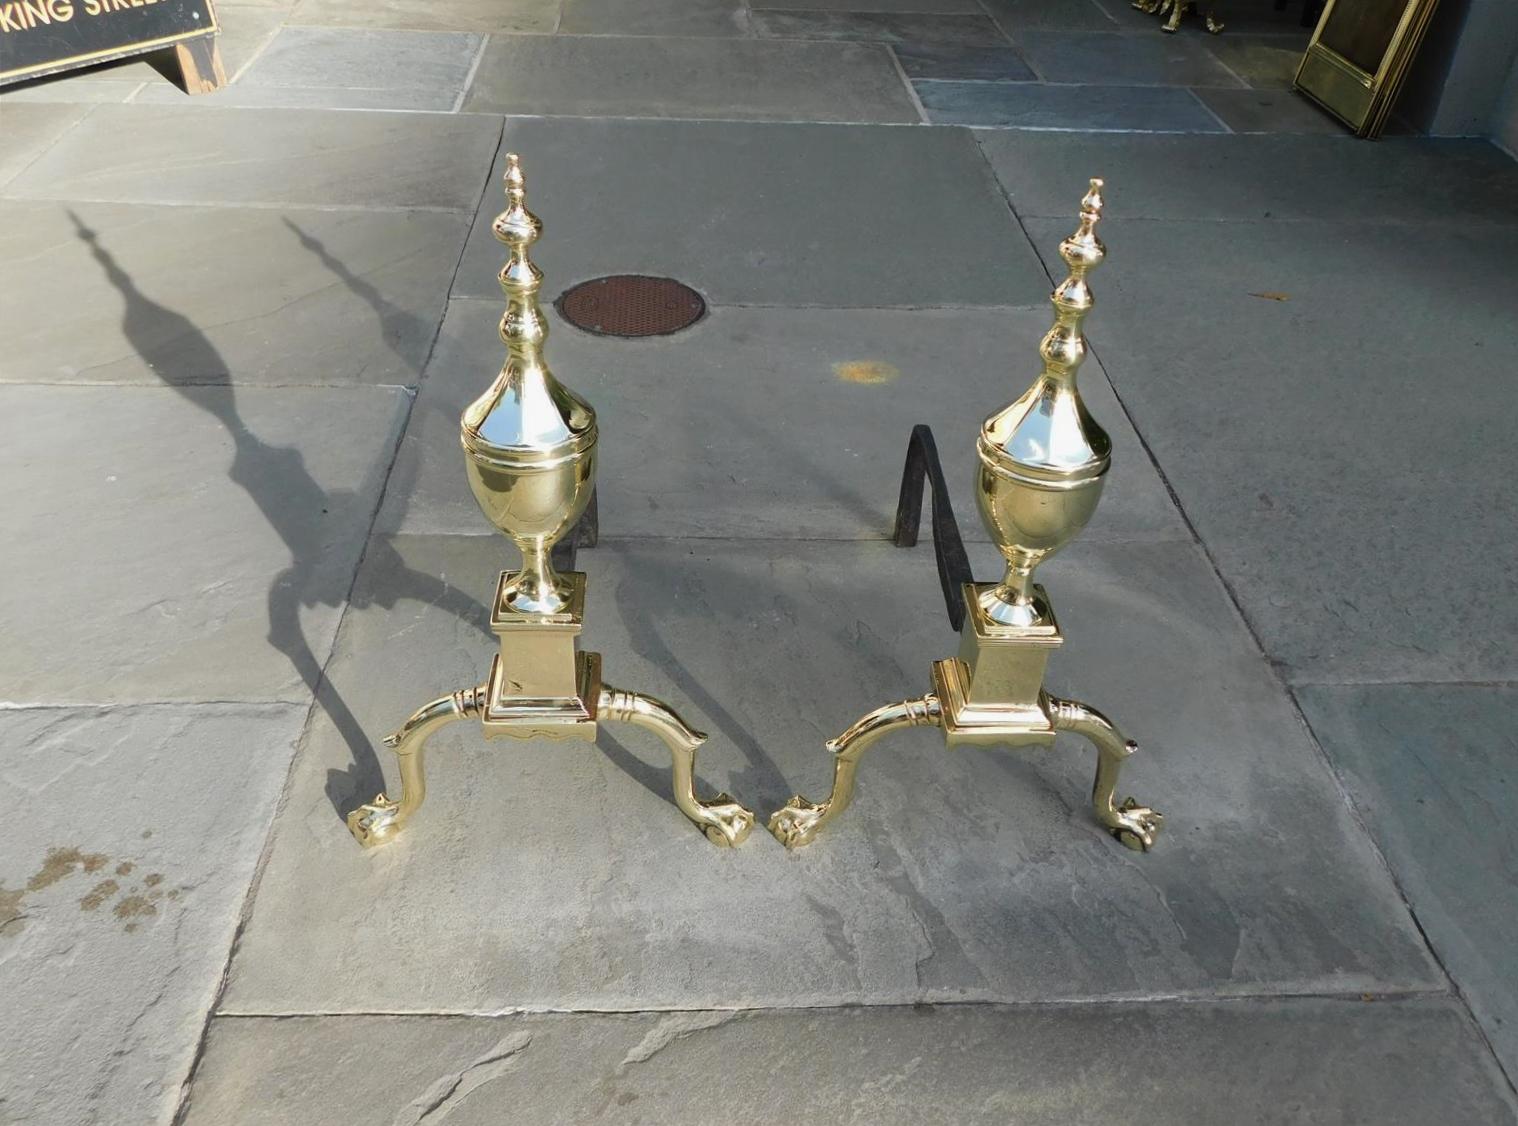 Pair of American brass flanking faceted Urn on Urn finial andirons with squared plinths, scalloped skirts, original wrought iron rear dog legs, and resting on banded spur legs with ball and claw feet. Philadelphia, late 18th century.